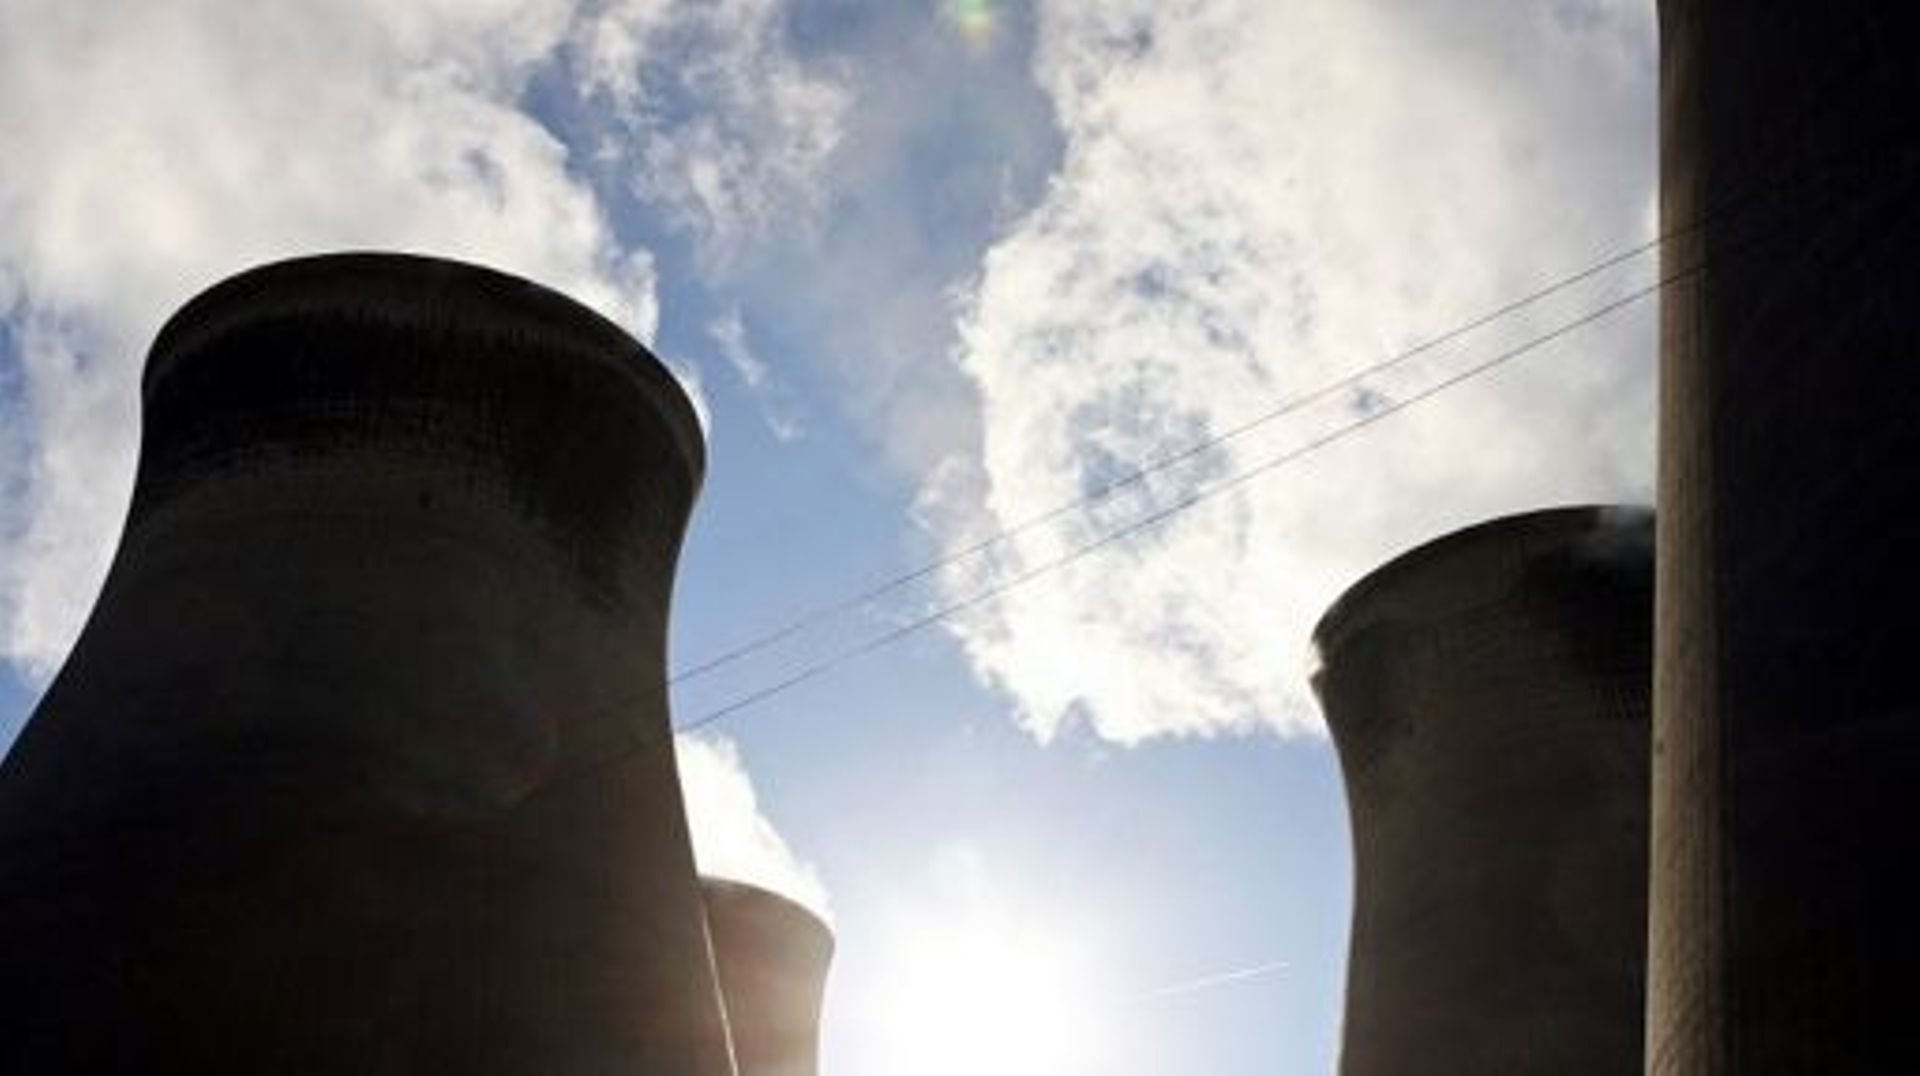 Steam rises from the eight cooling towers at the Ferrybridge power station near Leeds, in the north of England, 30 October 2006. The coal fired power plant was the first 2000MW power station in Europe  and first supplied energy to the National Grid in 196